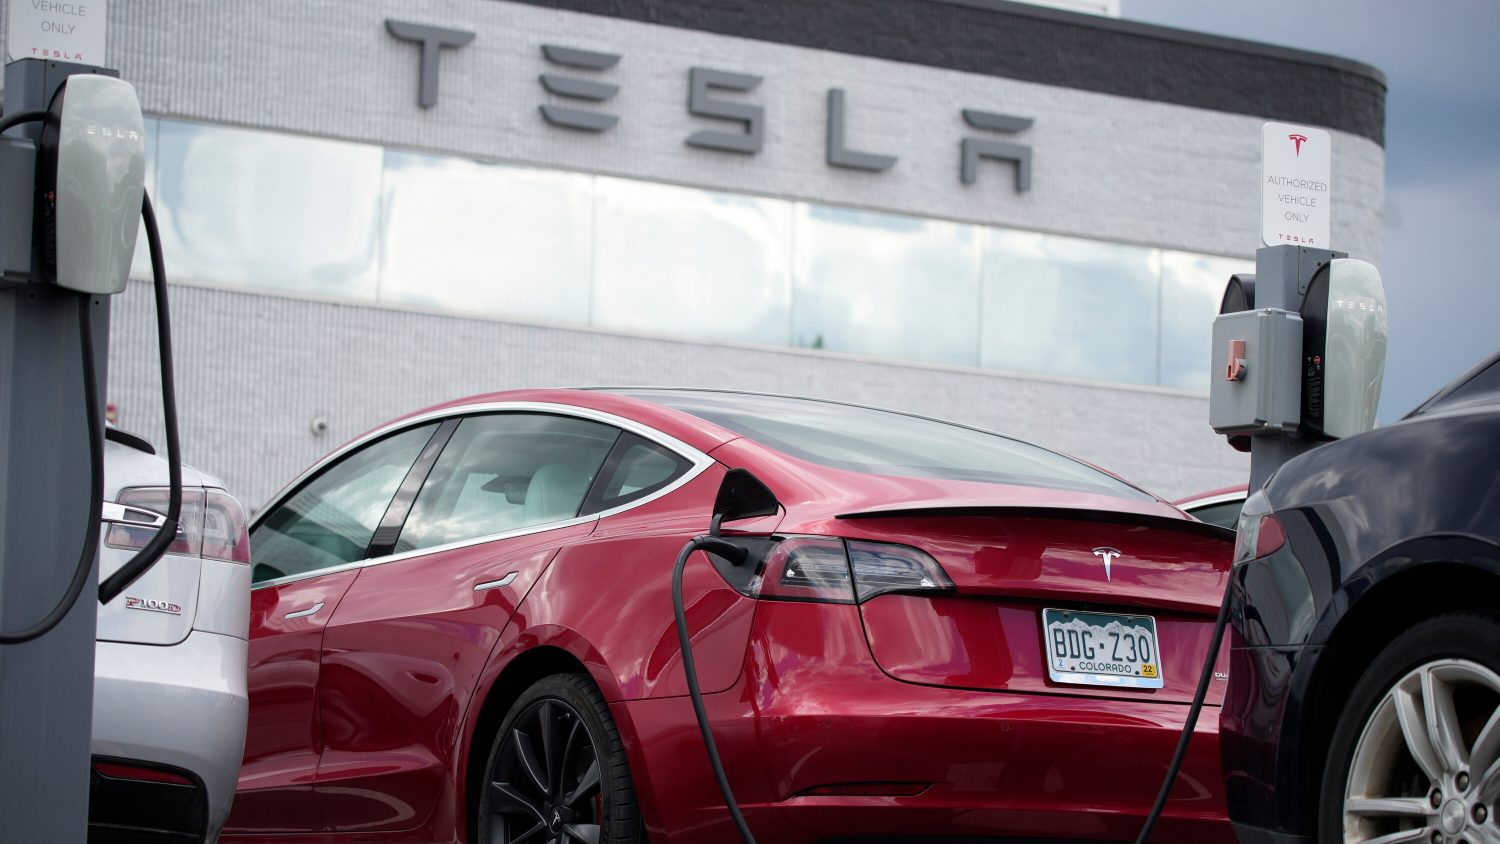 After the Austin-based EV maker's most recent price cuts, Tesla's best-selling EVs now directly compete with gasoline cars on price.